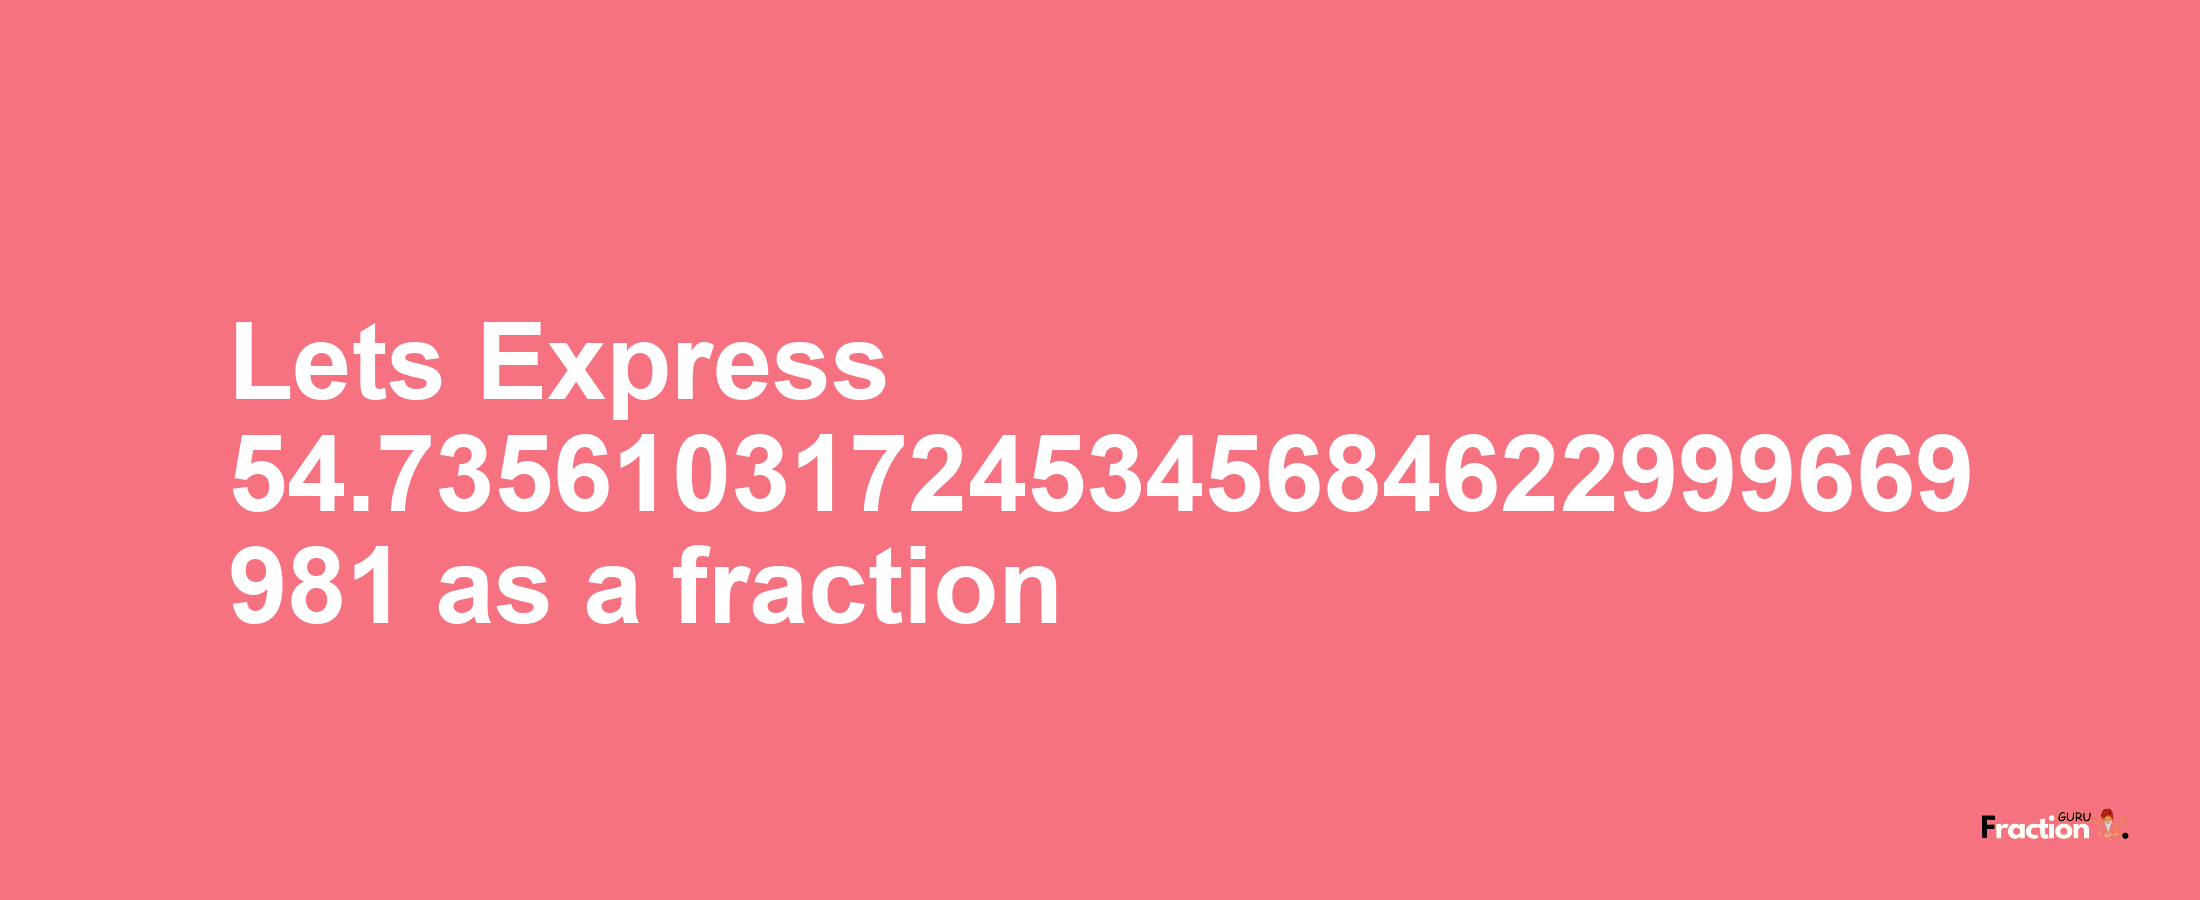 Lets Express 54.735610317245345684622999669981 as afraction